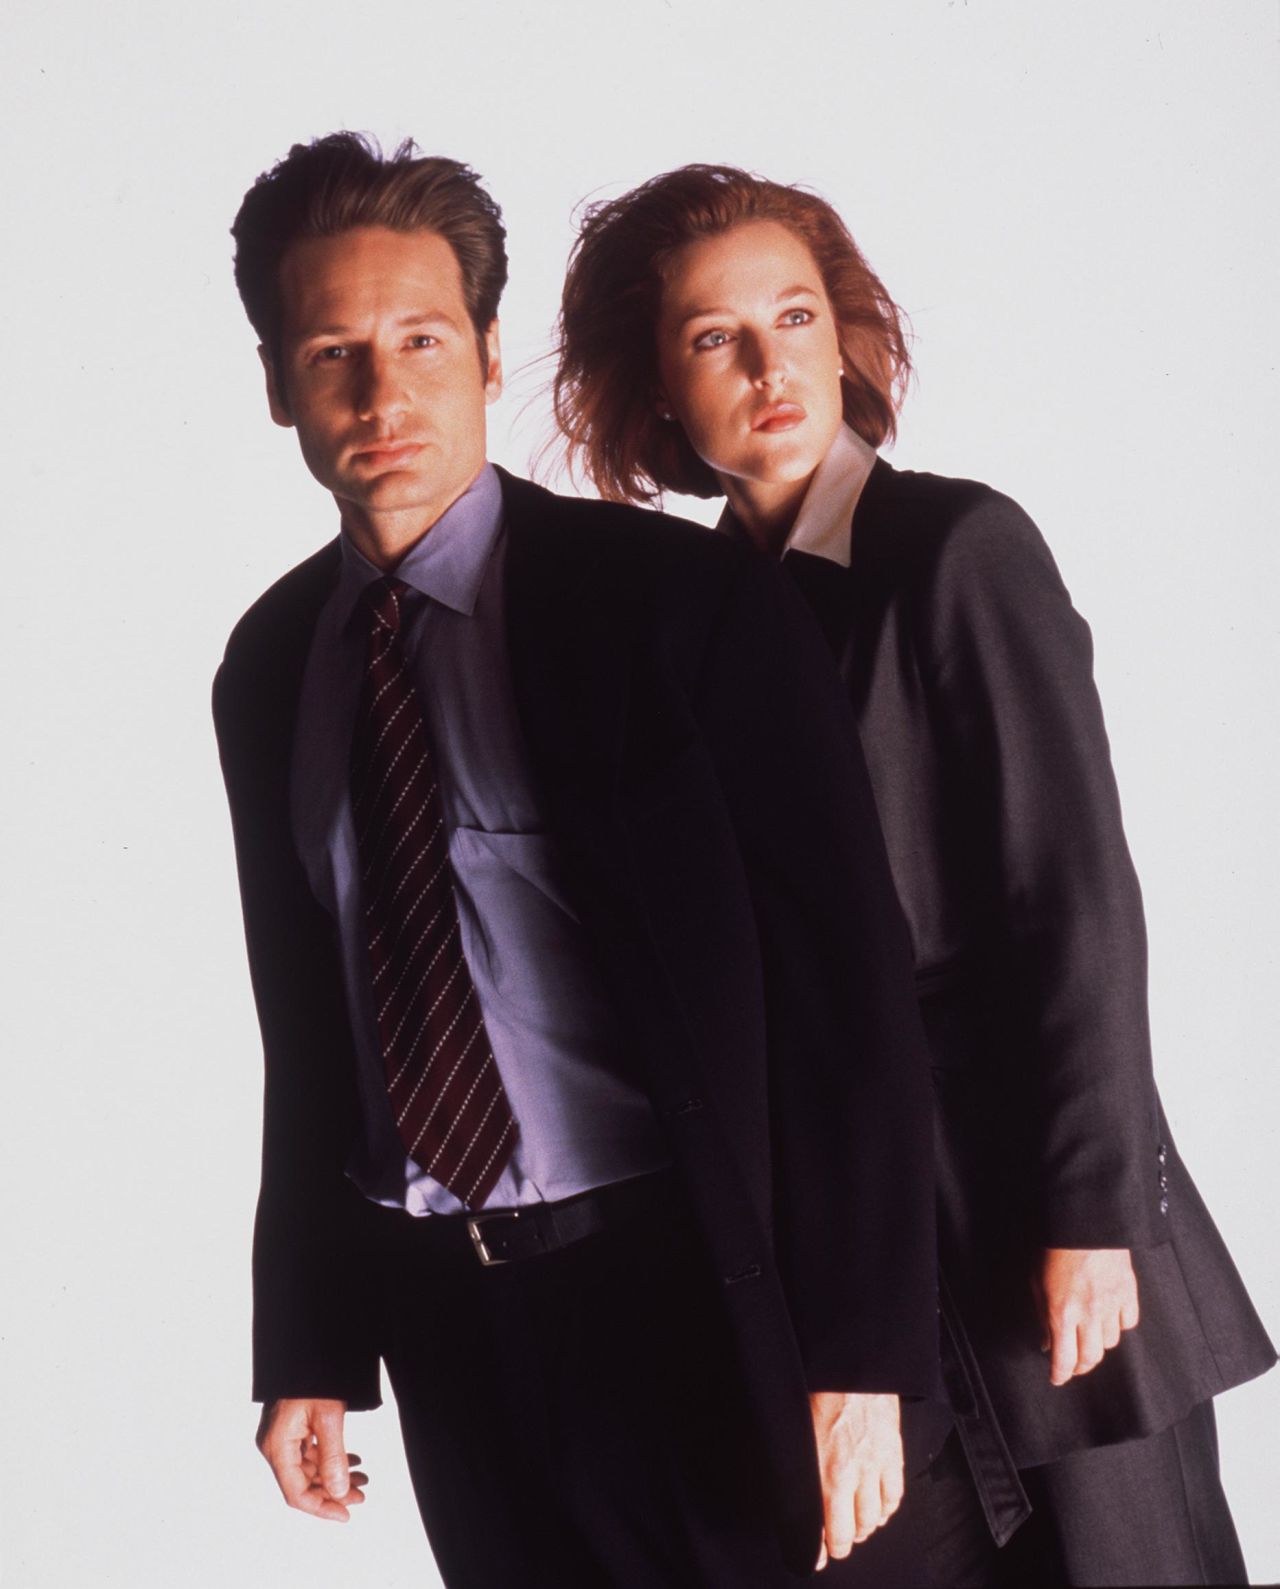 Meet sci-fi's power couple. Agents Fox Mulder and Dana Scully brought sex appeal to the paranormal as every glance between the two was analyzed by fans in the early days of the Internet. David Duchovny eventually left the series, and interest in "The X-Files" waned when Gillian Anderson paired up with Robert Patrick (any romance was out of the question). Duchovny returned for the poorly received finale and even more poorly received second movie. They're trying again in a new series.